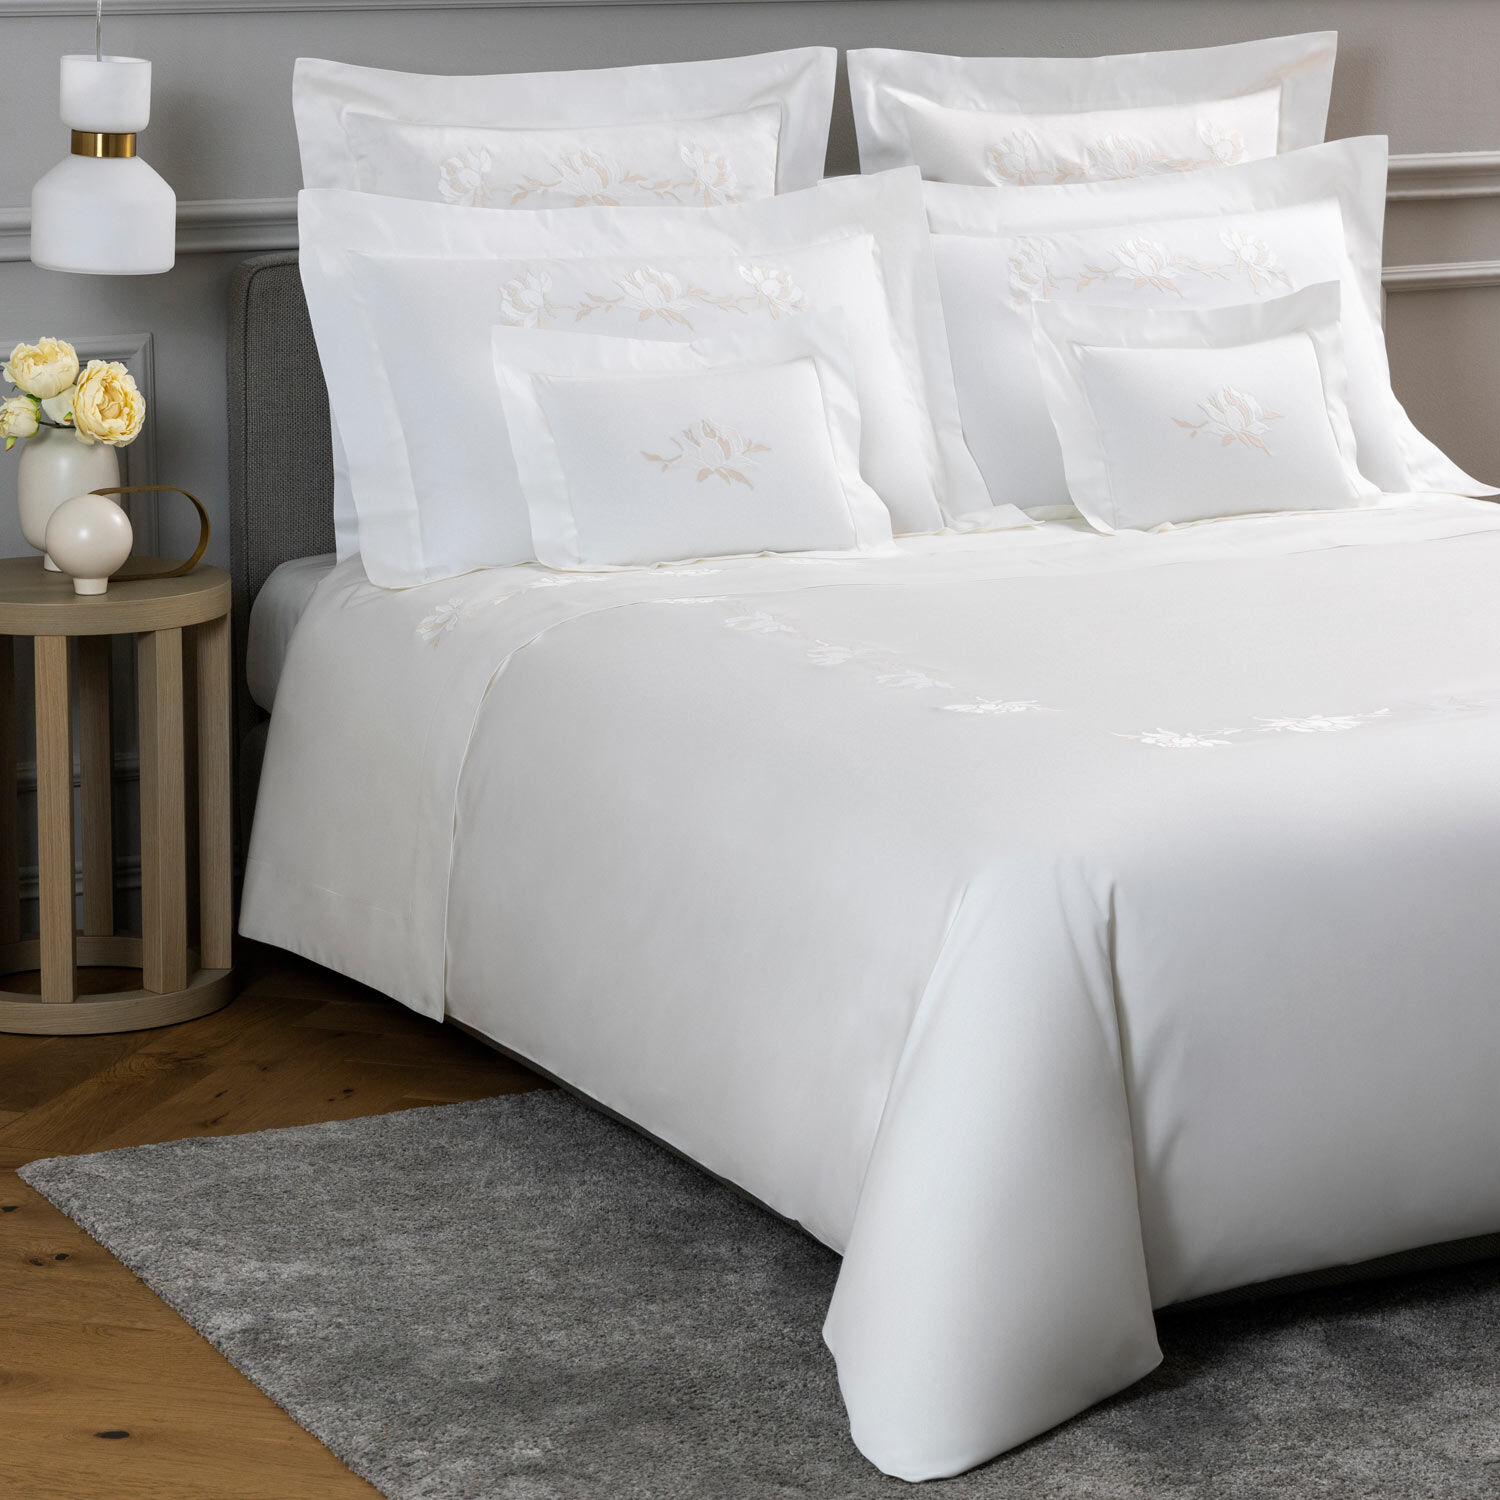 slide 4 Peonia Embroidered Duvet Cover